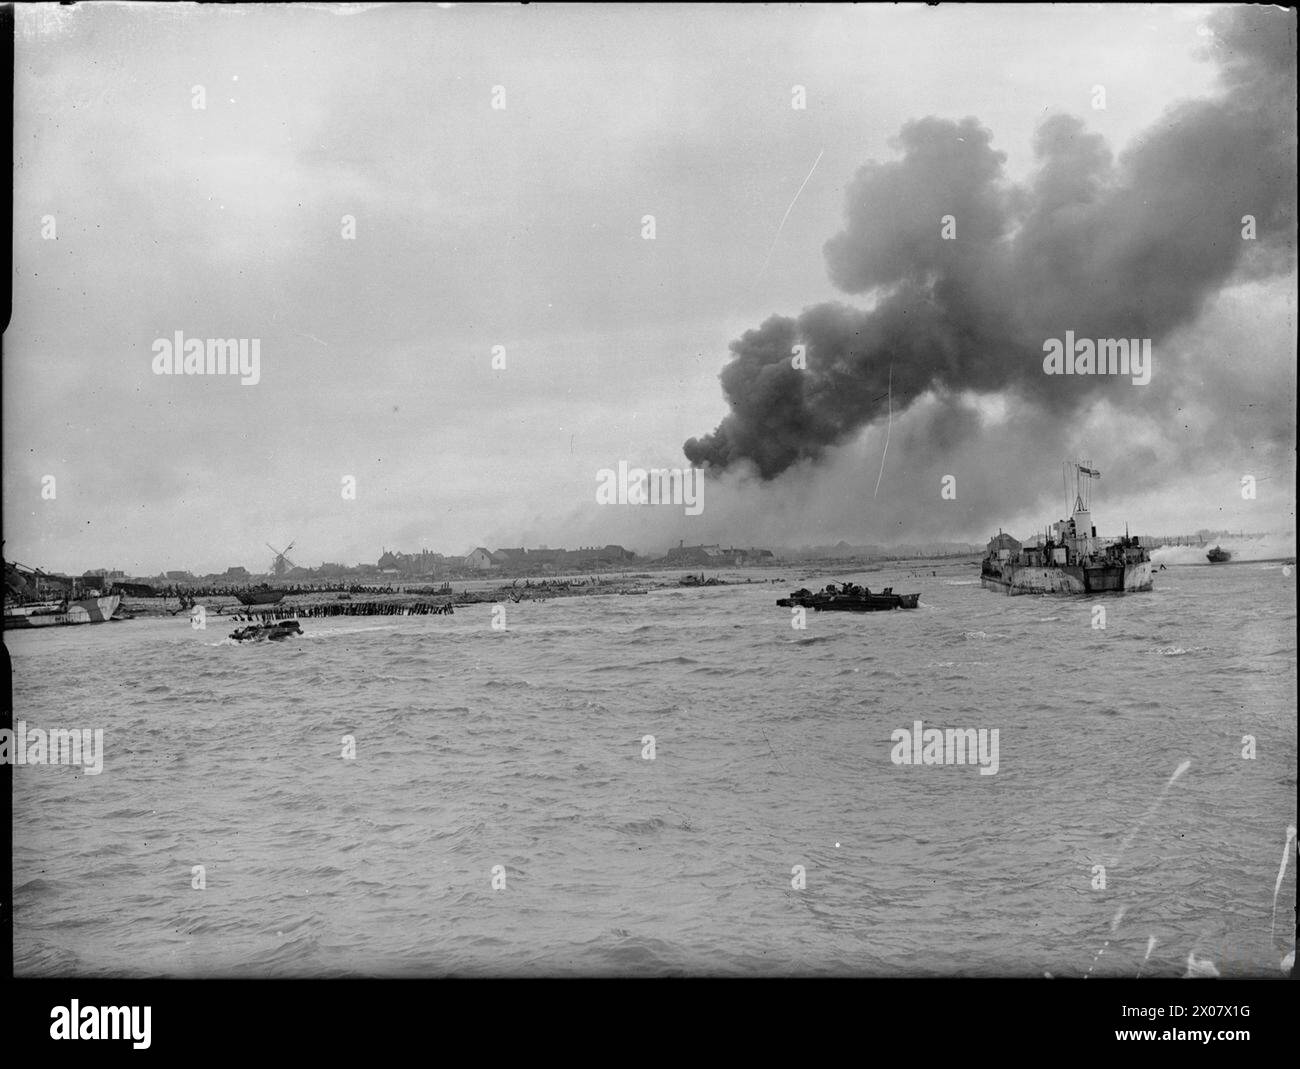 THE ROYAL NAVY DURING THE SECOND WORLD WAR - DUKWs or 'Ducks' head towards the shore from a landing craft tank (LCT 952) whilst an Alligator personnel carrier can be seen on the beach. A large plume of smoke is rising high into the air from an enemy strongpoint on fire in the background during the landing by Royal Marine commandos on the island of Walcheren at Westkapelle, the most western point of the island, the final phase of the battle to free the Belgian port of Antwerp  Royal Navy, LCT 952 Stock Photo